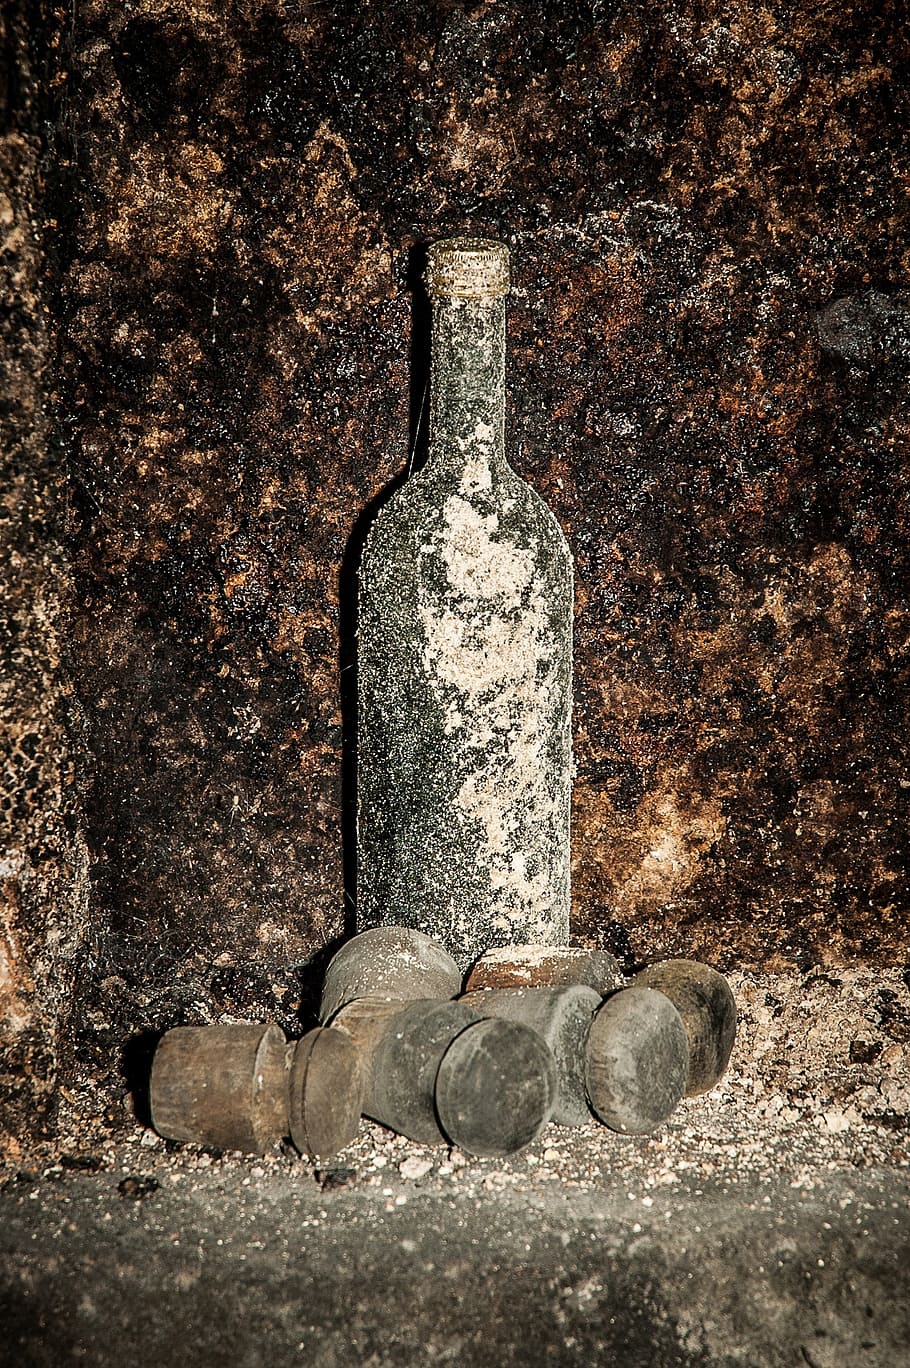 old wine bottle, cellar, bottle, mold, forget, container, old, glass - material, wine bottle, refreshment